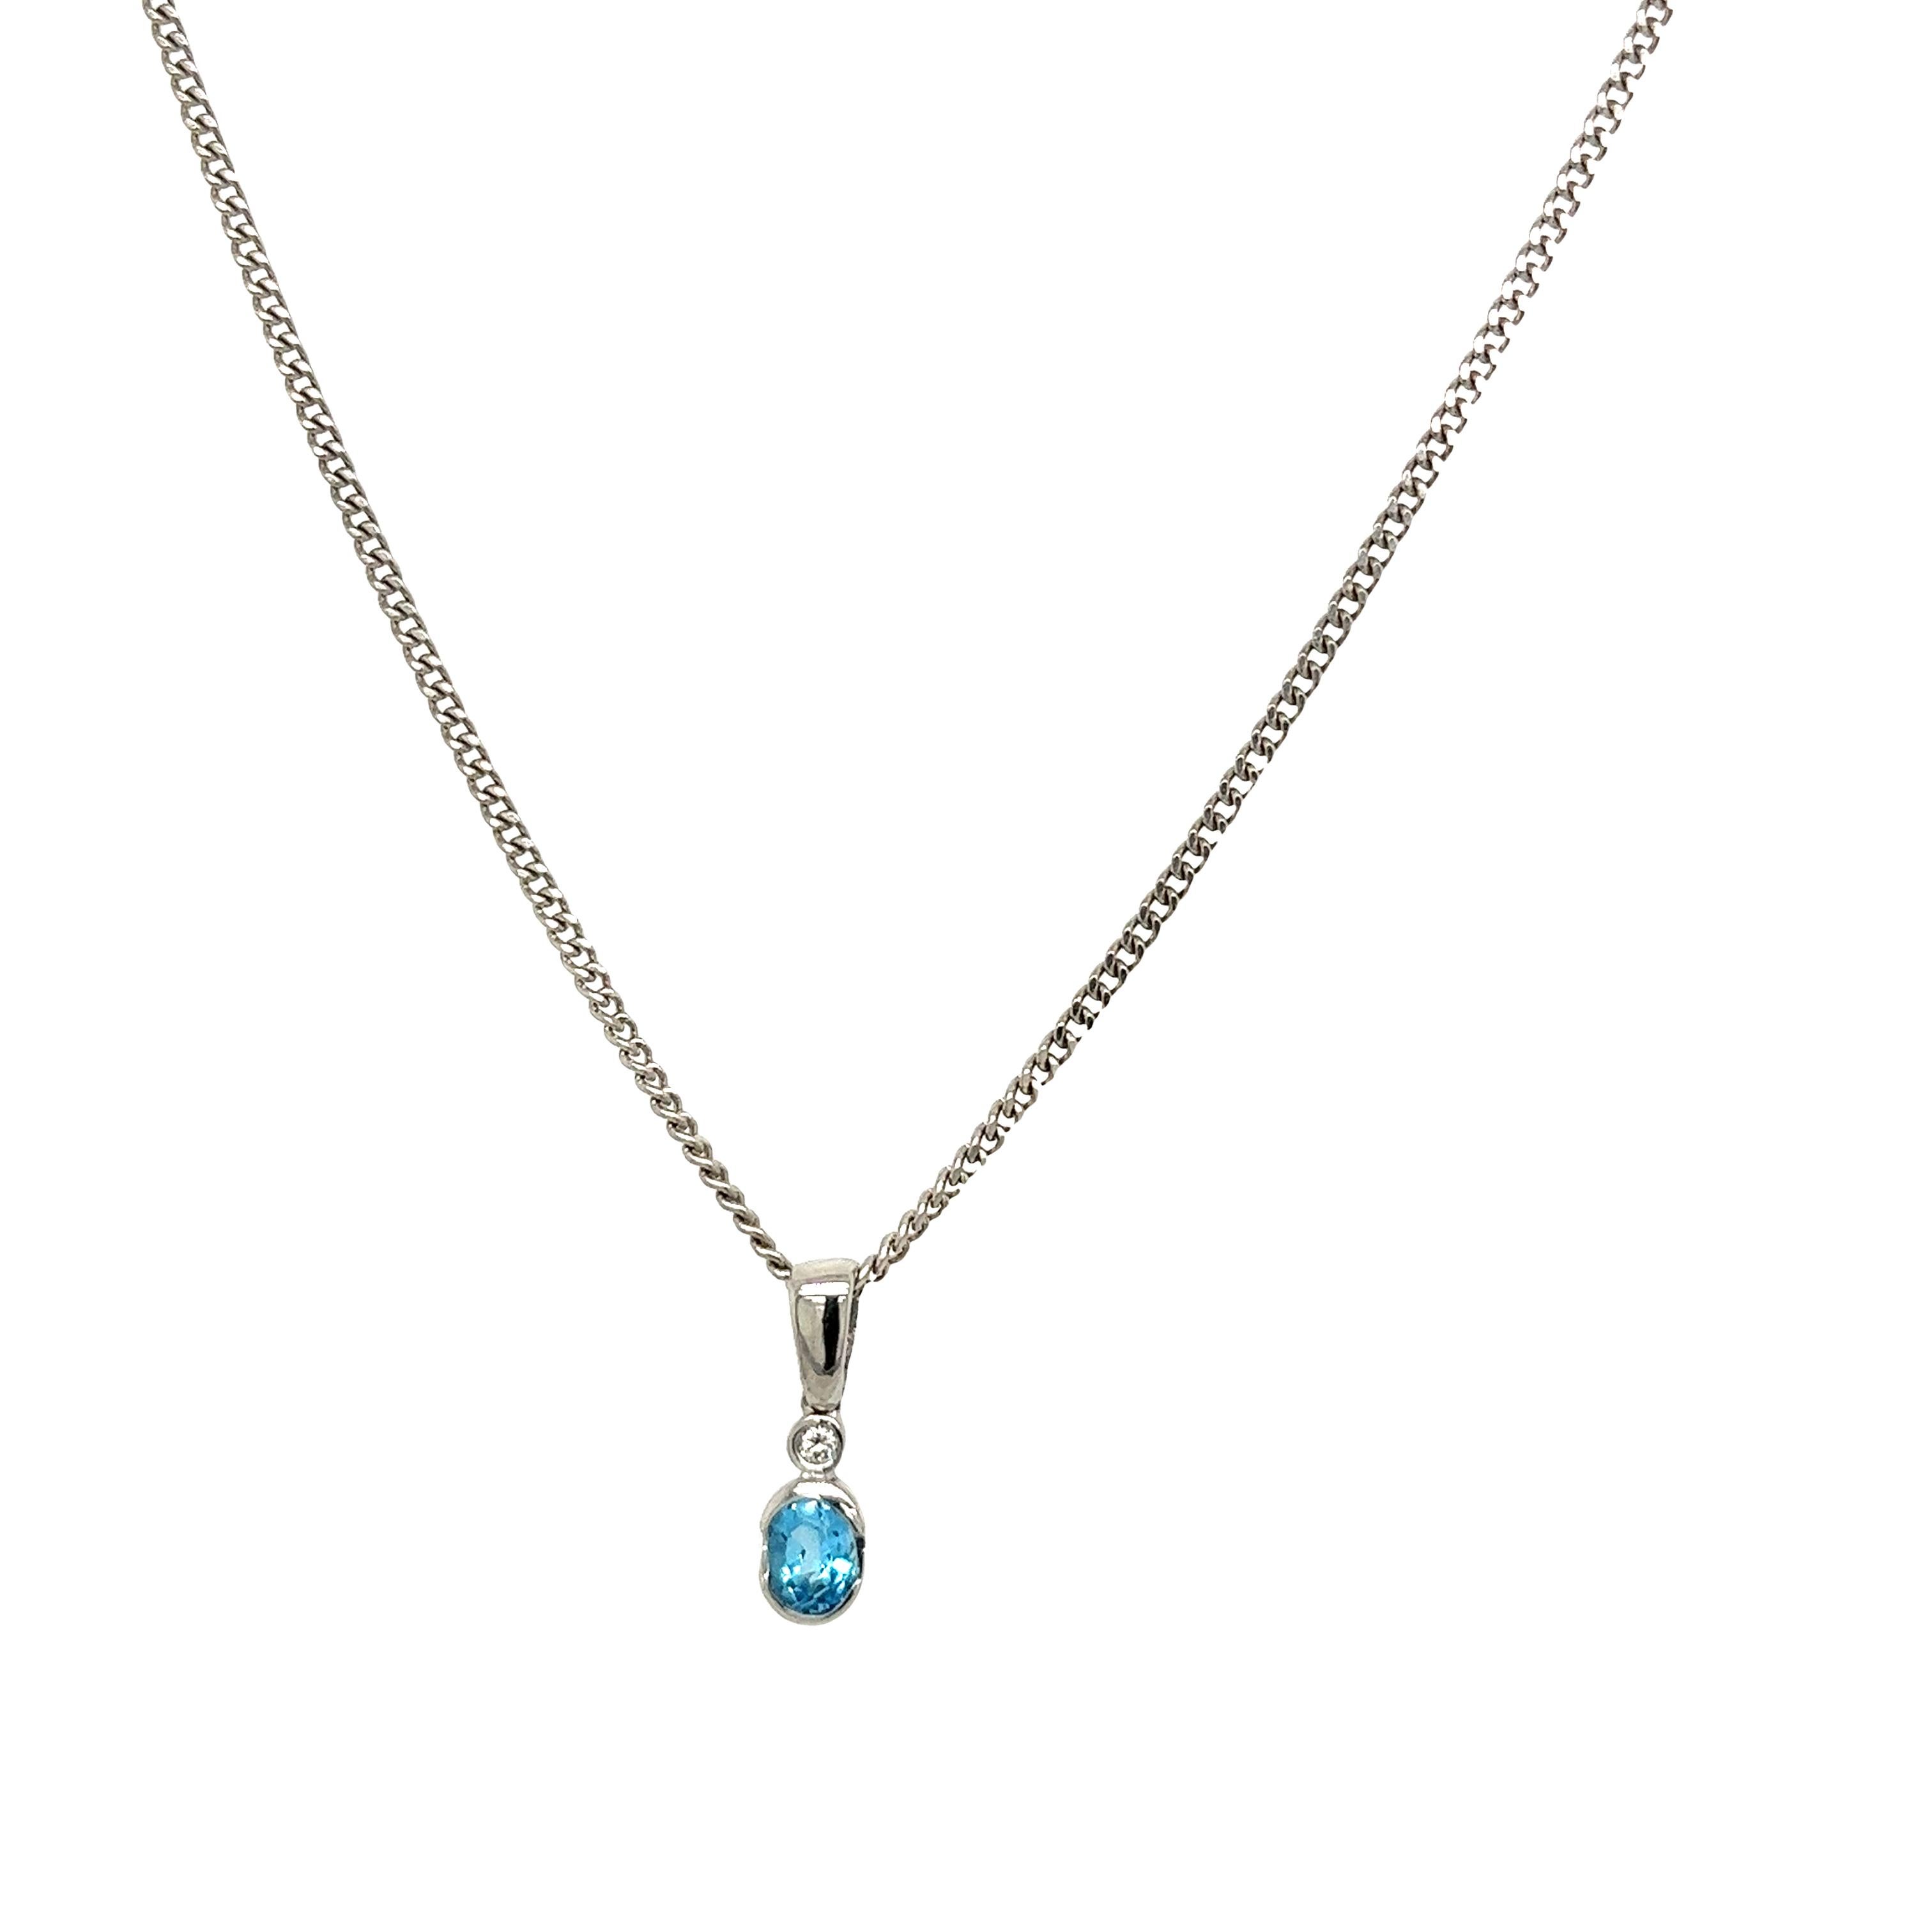 This gorgeous diamond and blue topaz pendant is set with a round brilliant cut diamond and an oval shape blue topaz in 18ct white gold. The pendant is suspended from an 18-white gold chain that measures 16 inches.

Item Length: 16